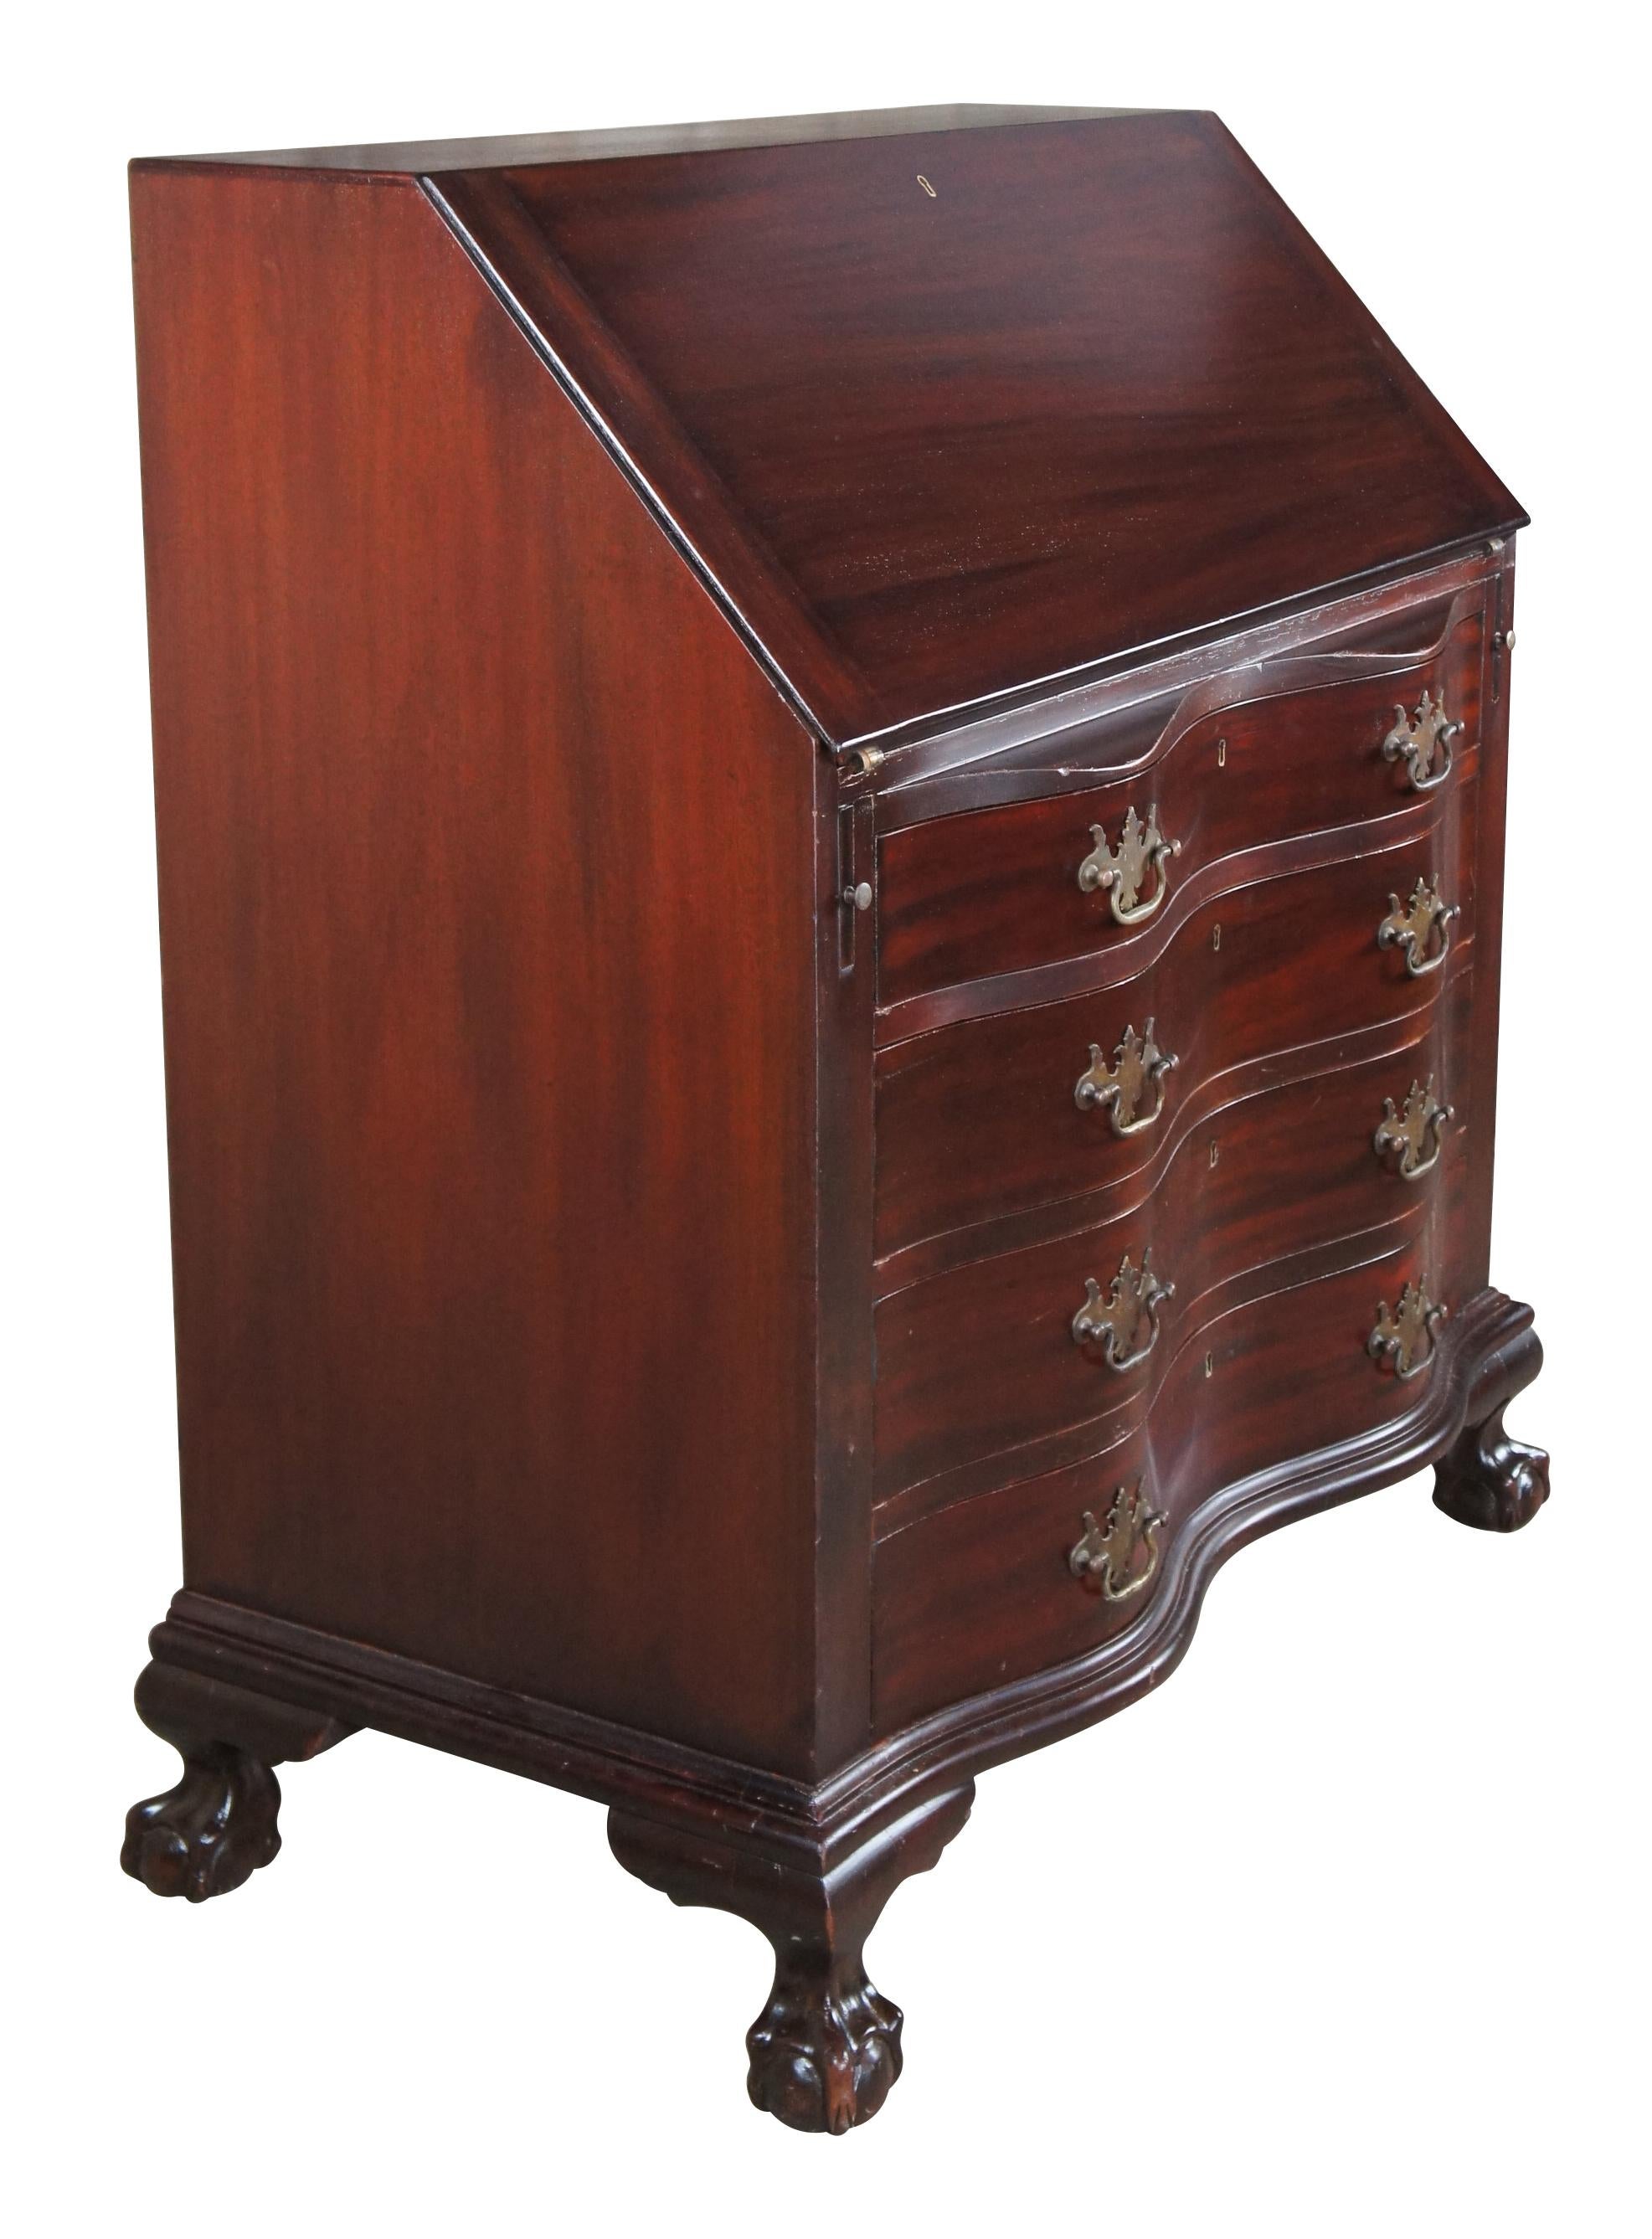 Antique early 20th century Chippendale style secretary or writing desk. Made of mahogany featuring serpentine form with drop front writing surface that opens to multiple drawers and cubbies, over four oxbow drawers that are mounted with classic